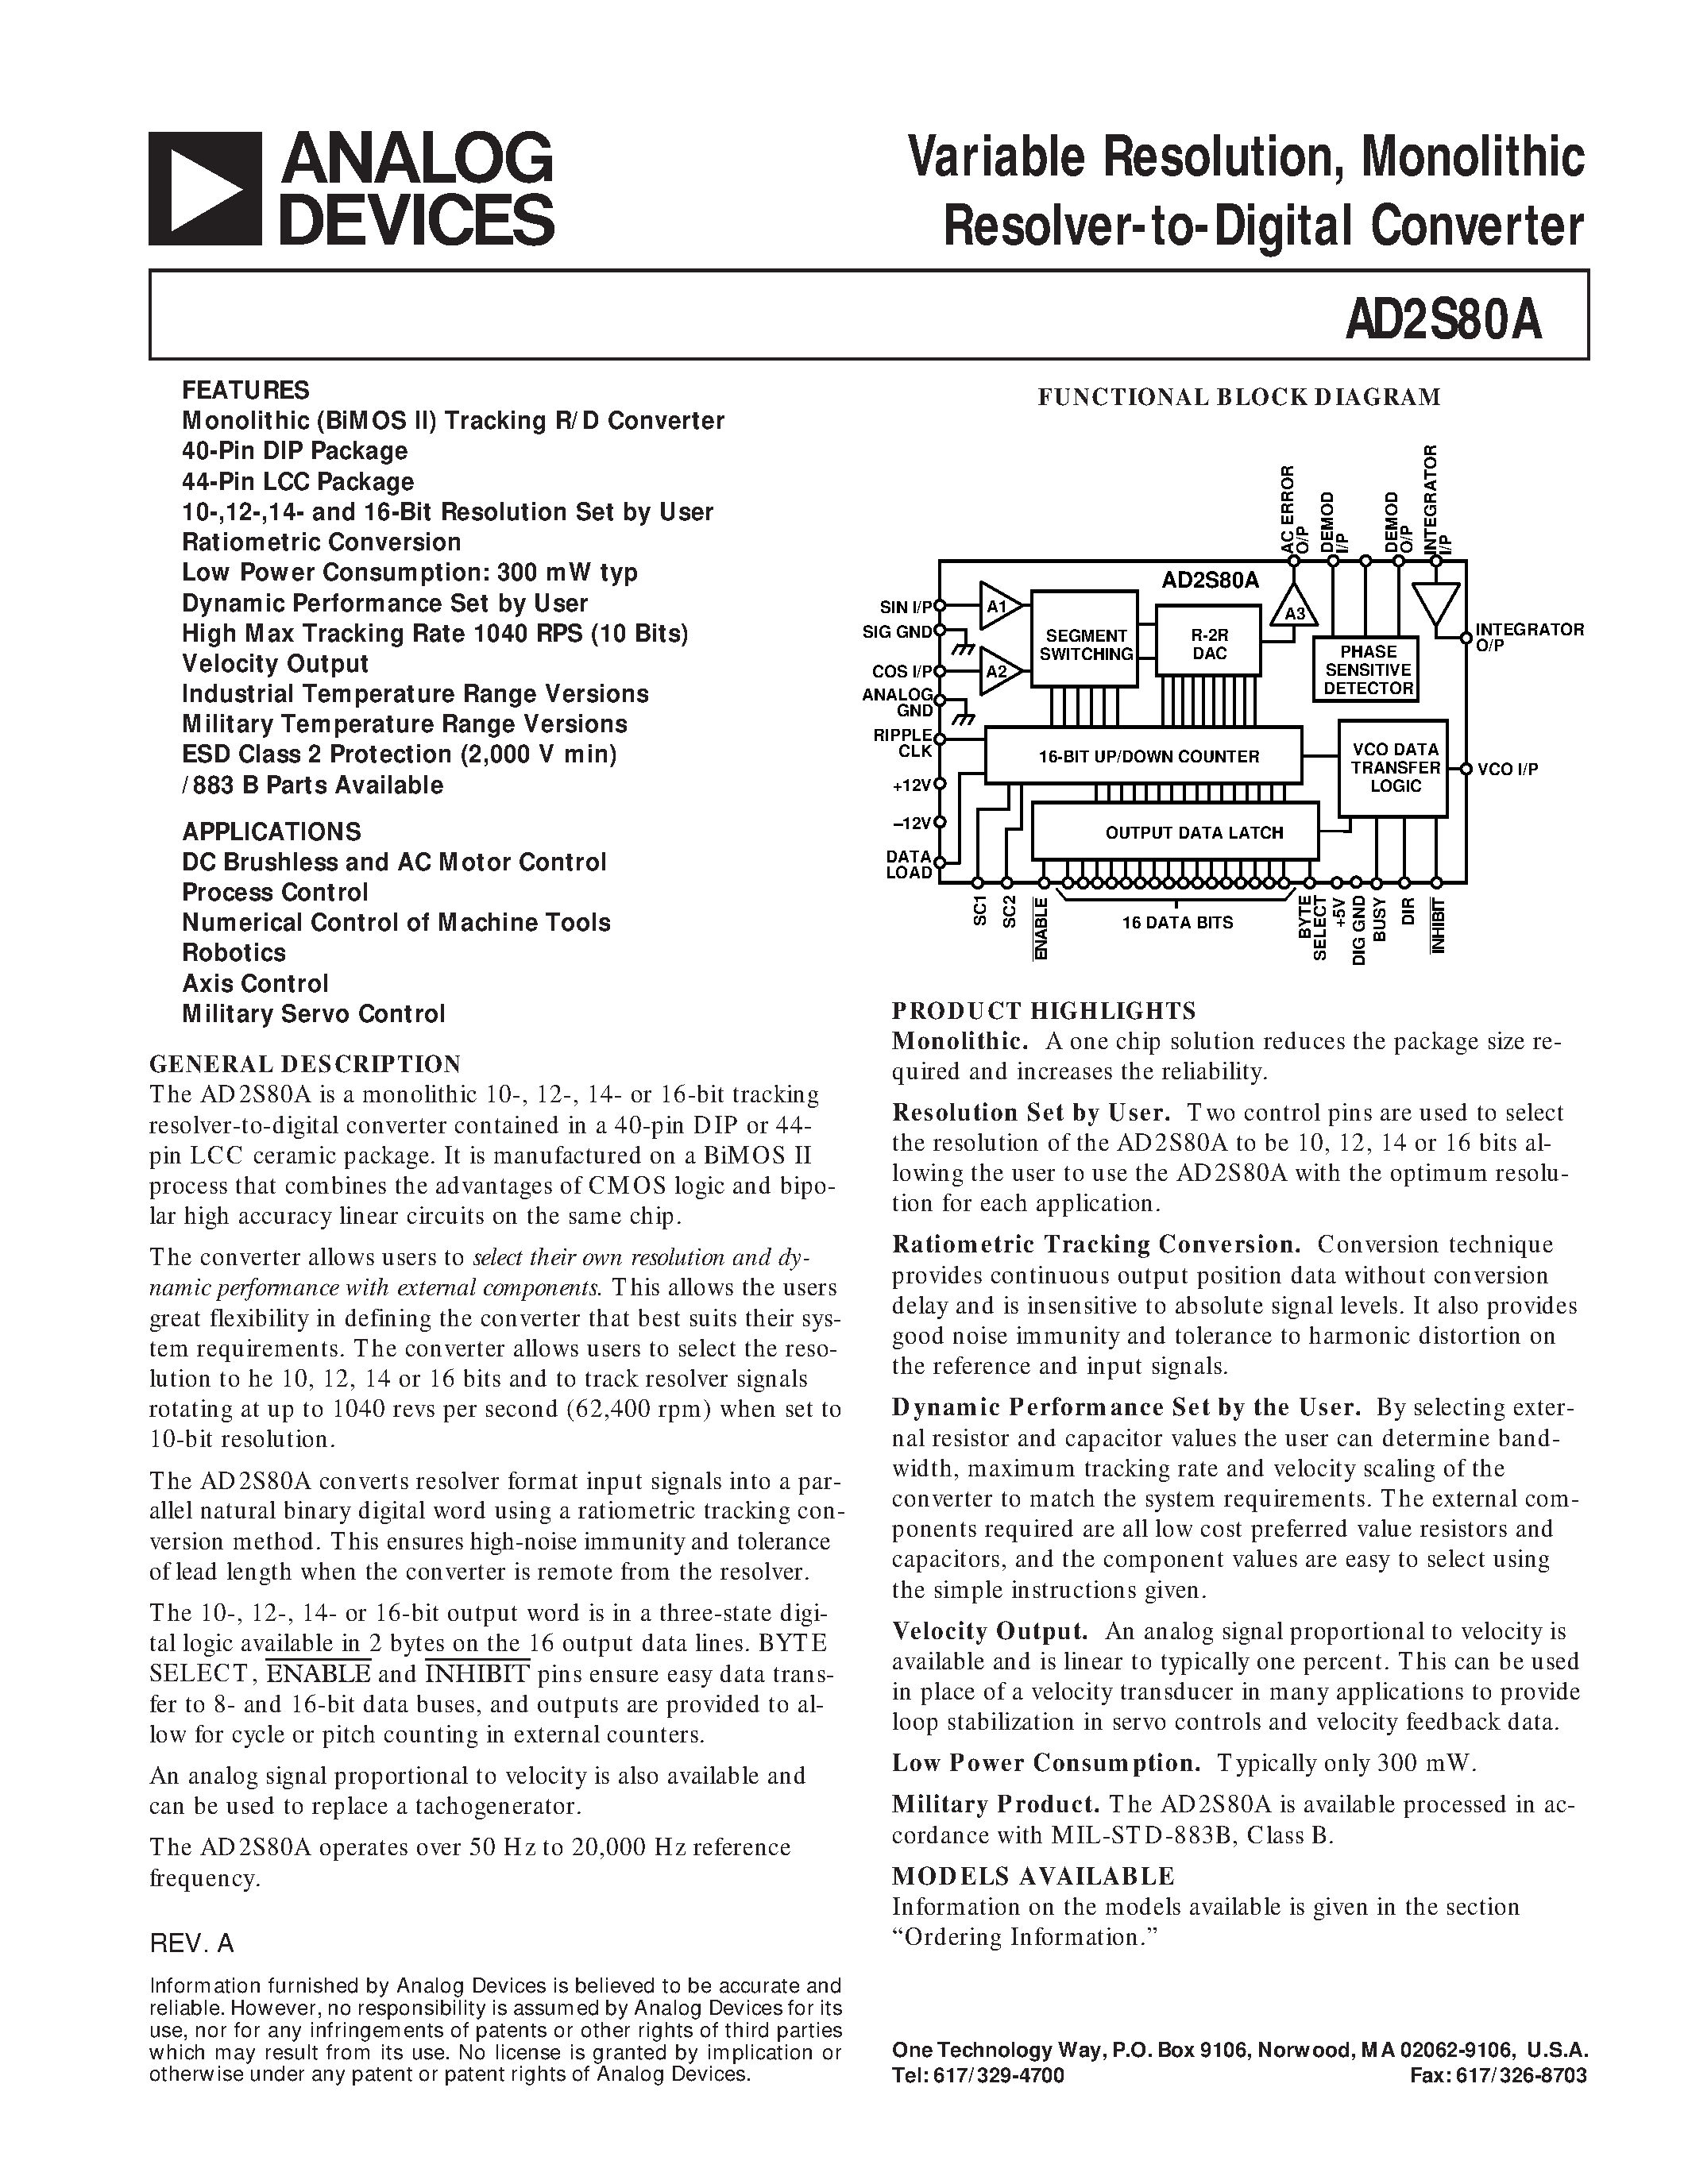 Datasheet AD2S80ALD - Variable Resolution/ Monolithic Resolver-to-Digital Converter page 1